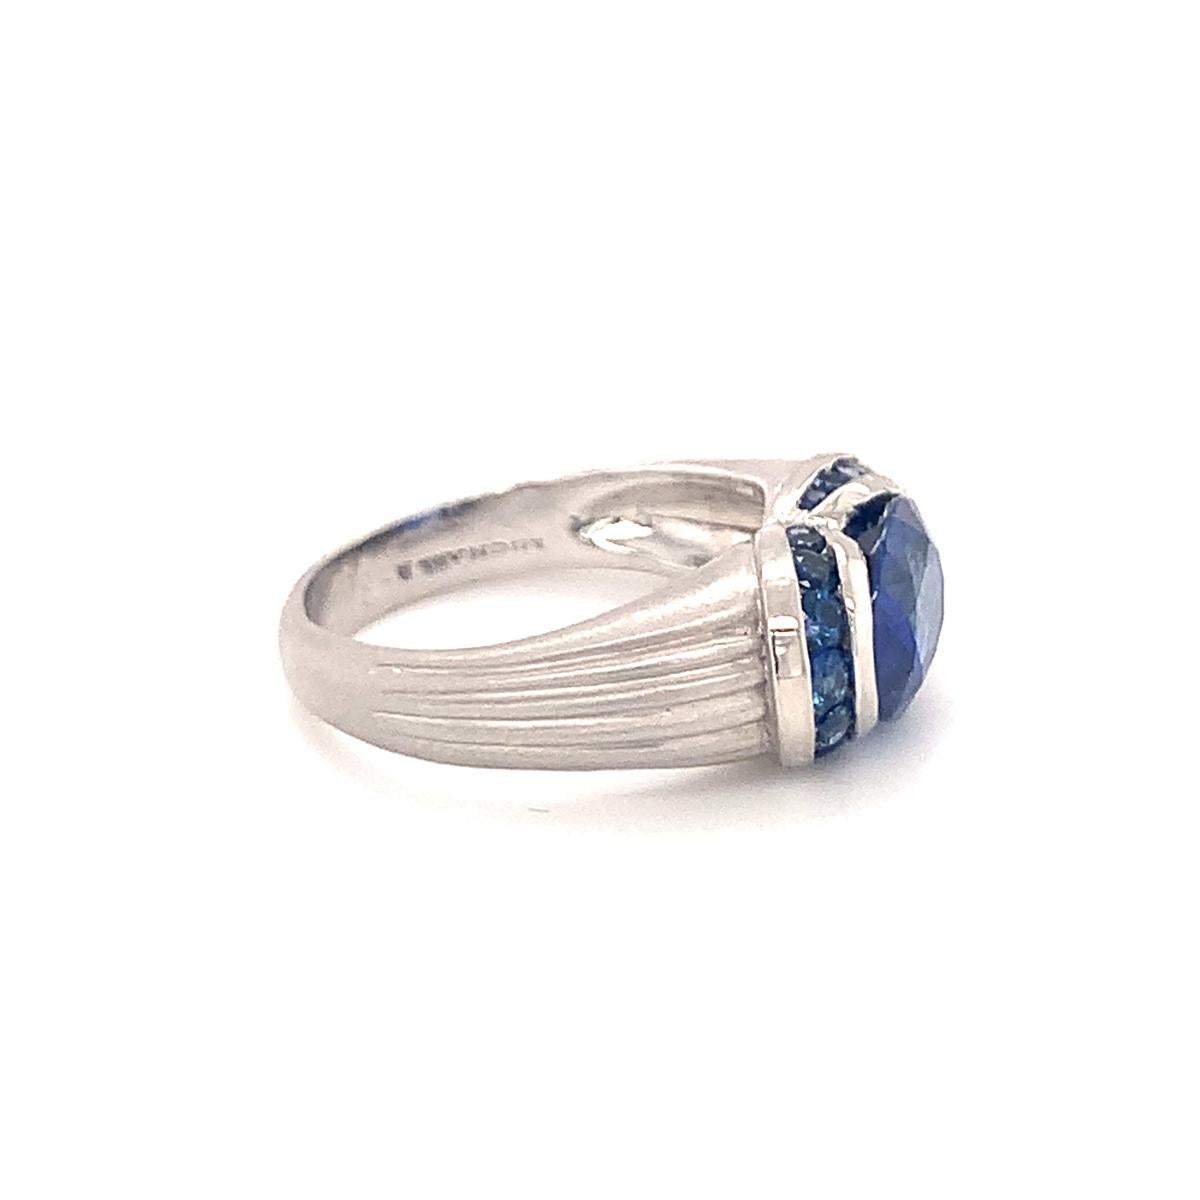 Oval Cut Sapphire Platinum Ring, circa 1990s For Sale